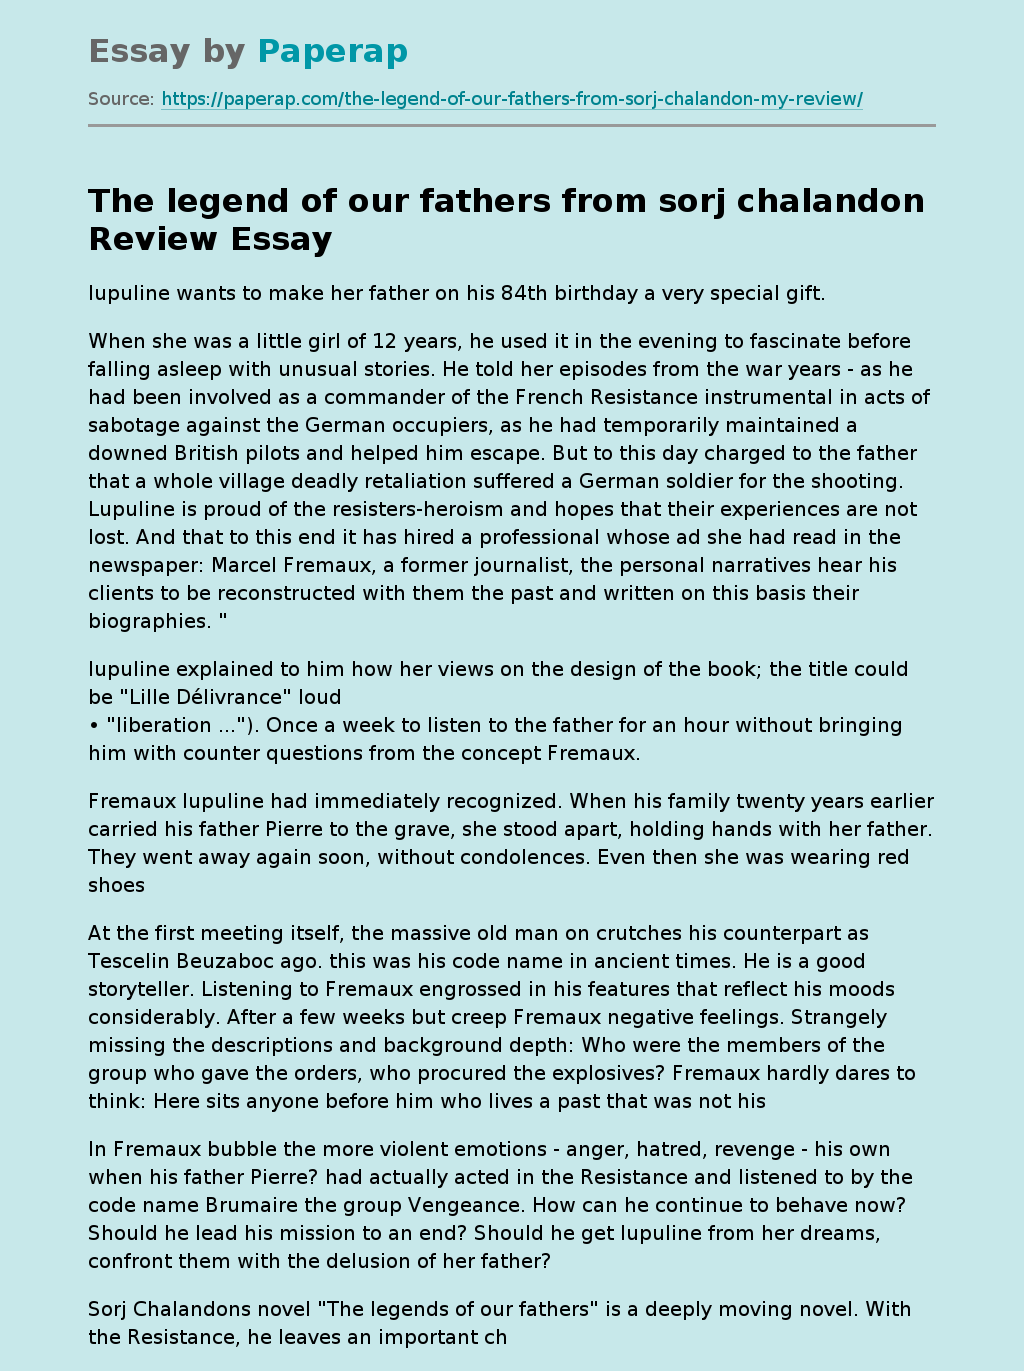 The legend of our fathers from sorj chalandon Review